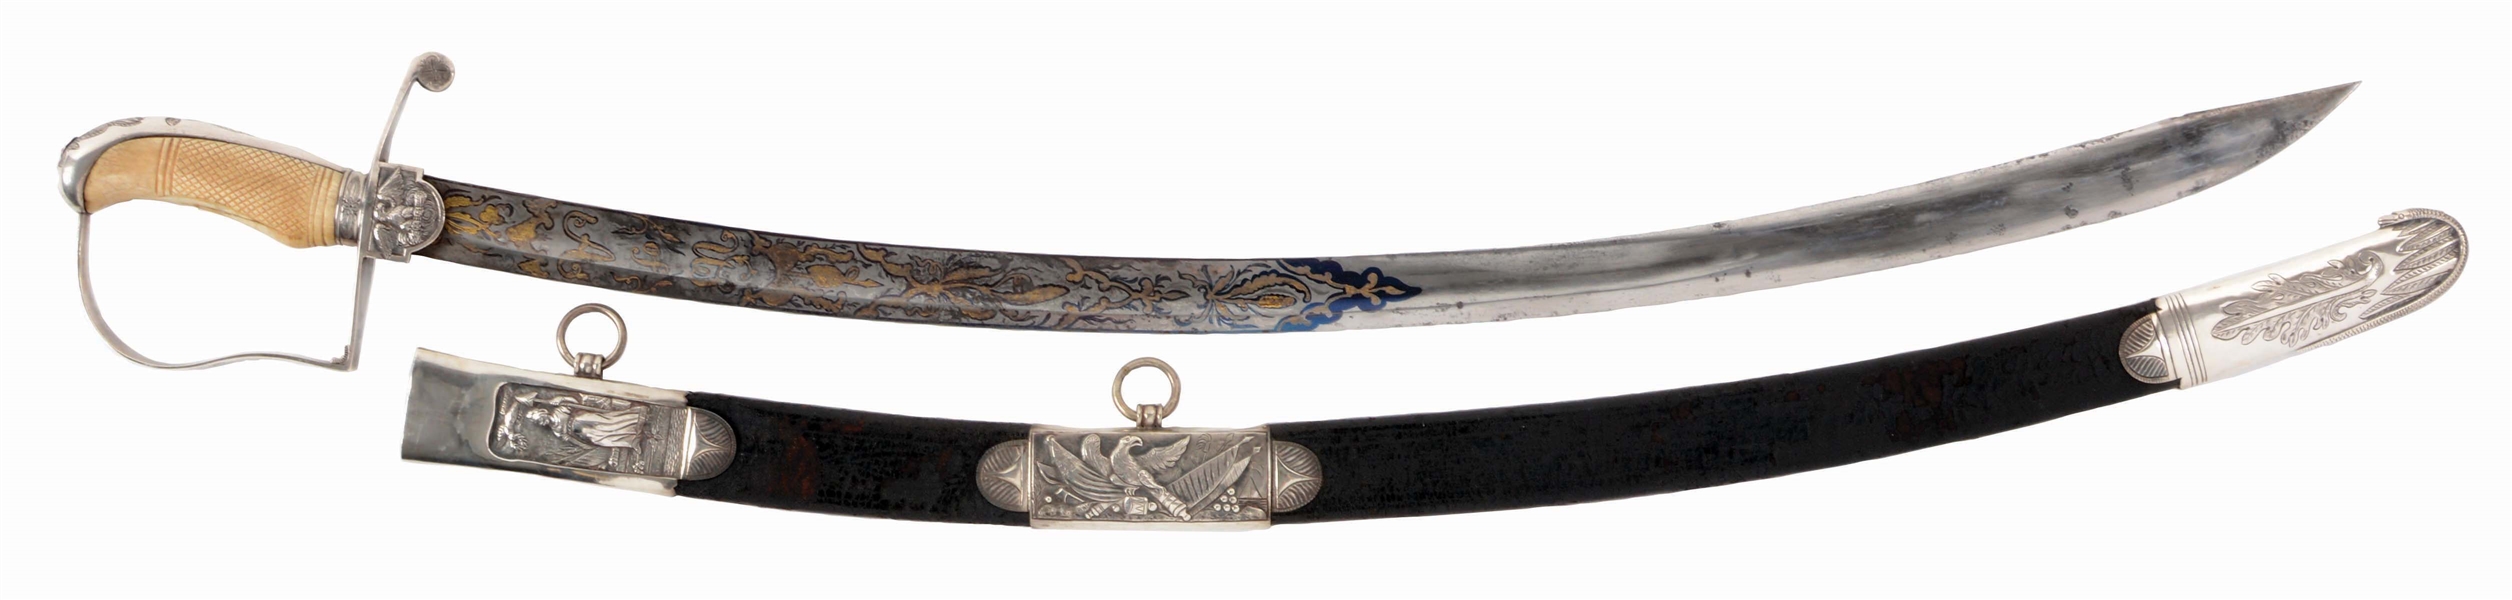 EXTRAORDINARY PHILADELPHIA SILVER HILTED SWORD WITH ORNATE SCABBARD.